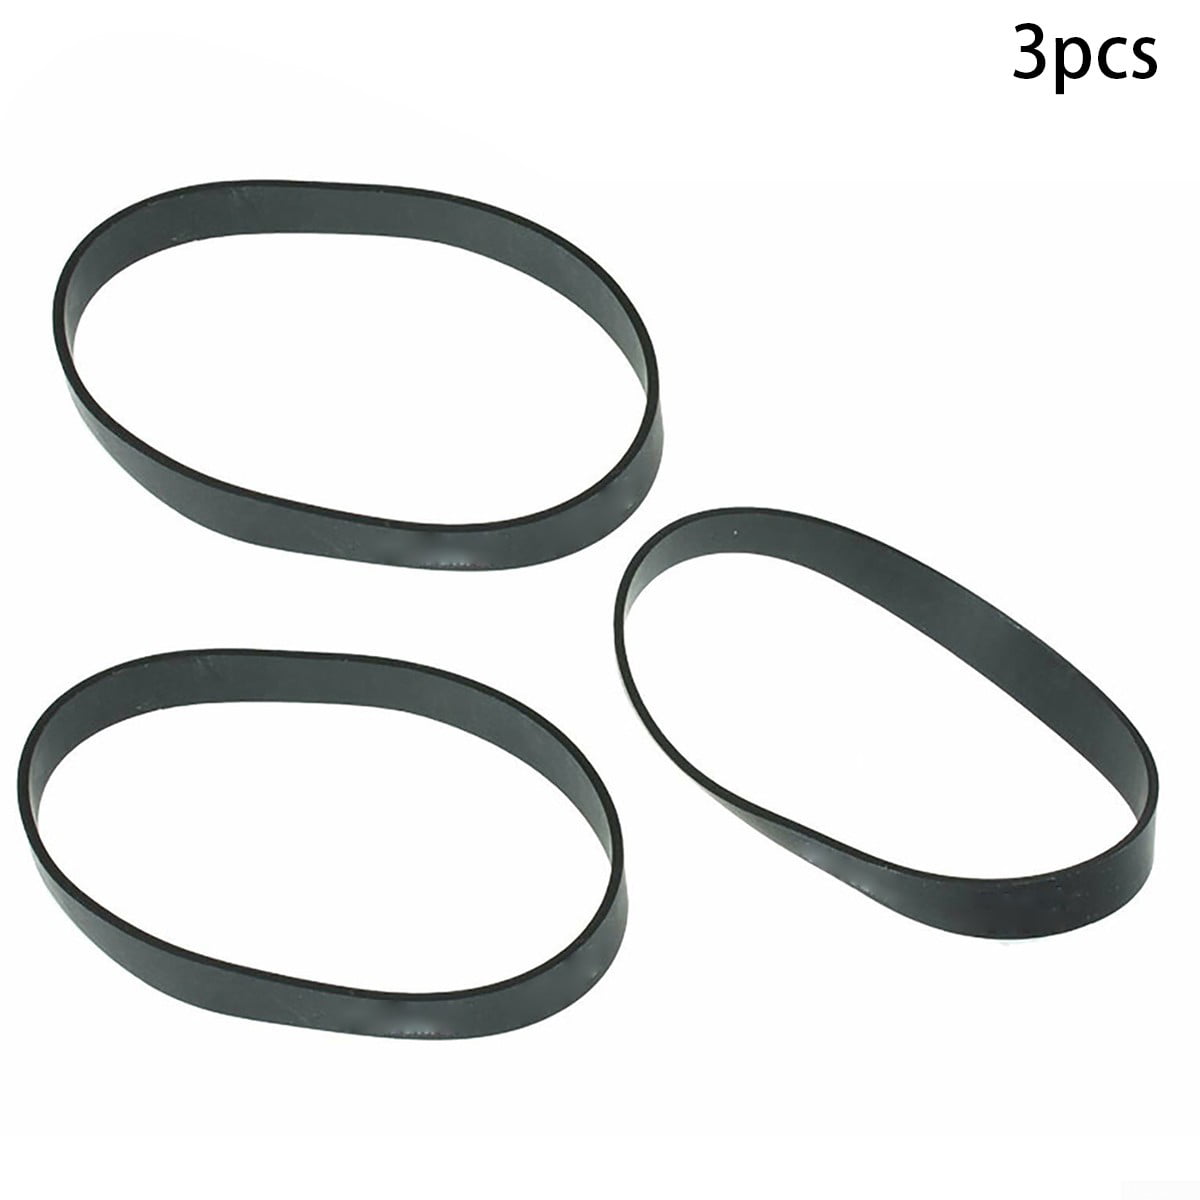 YMH29694 Vacuum Cleaner Hoover Drive Belts Pack Of 2 ORIGINAL QUALITY 